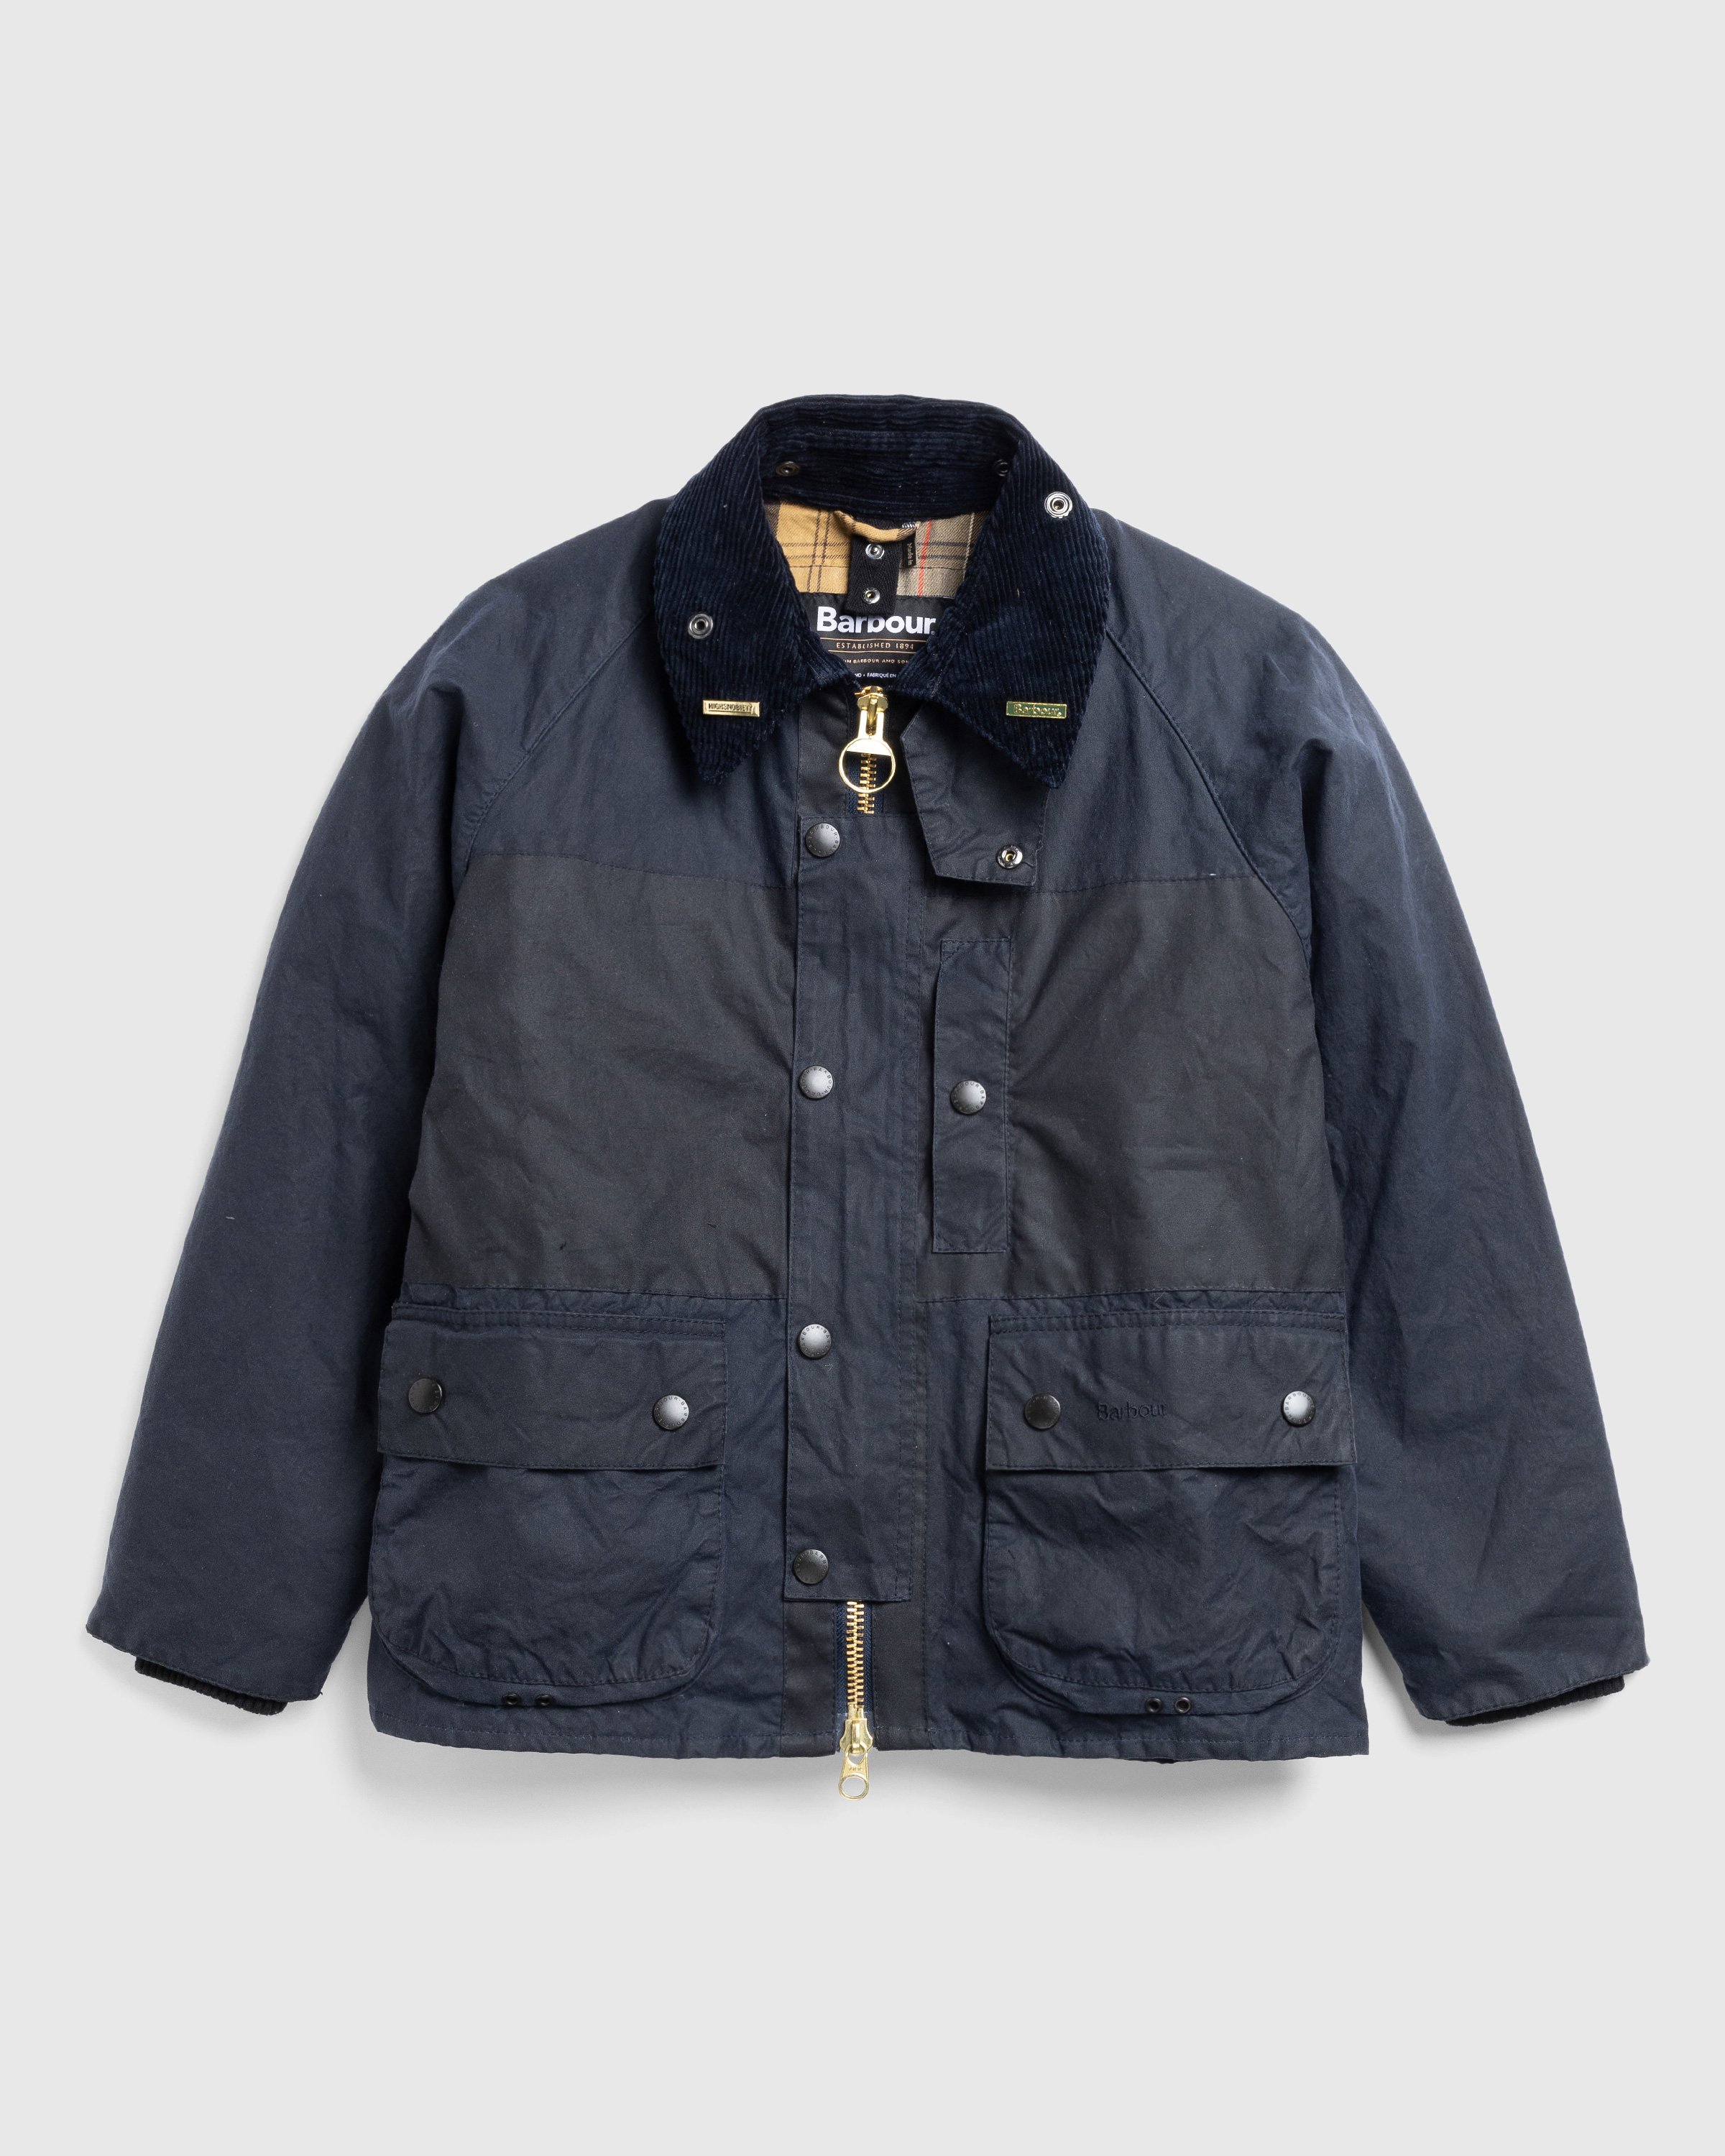 Barbour x Highsnobiety - Re-Loved Cropped Bedale Jacket 1 - 38 - Navy - Clothing - Olive - Image 1